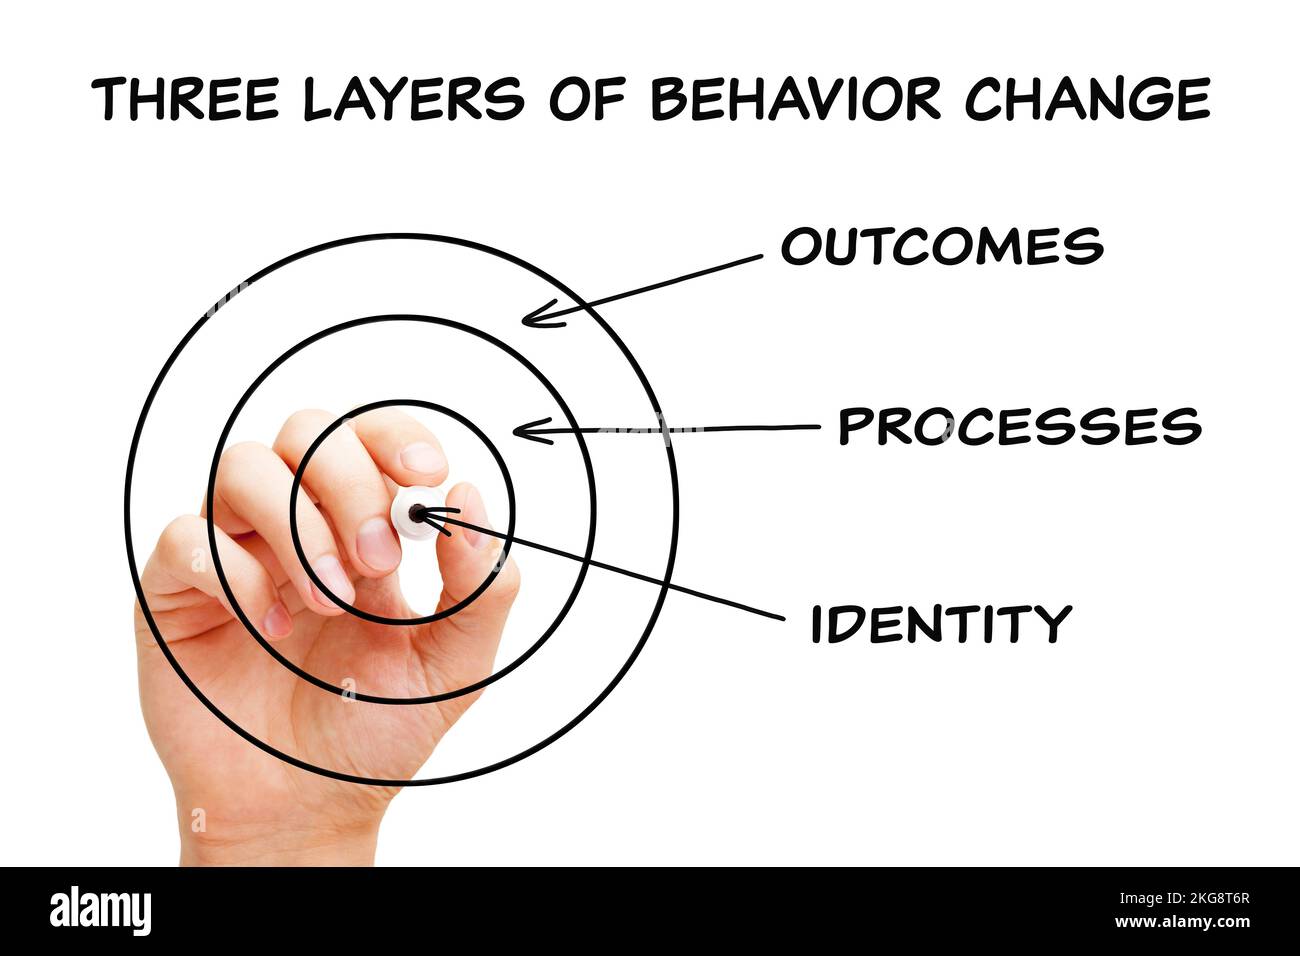 Hand drawing а concept about the three layers of behavior change - Identity, Processes and Outcomes with black marker on transparent wipe board. Stock Photo